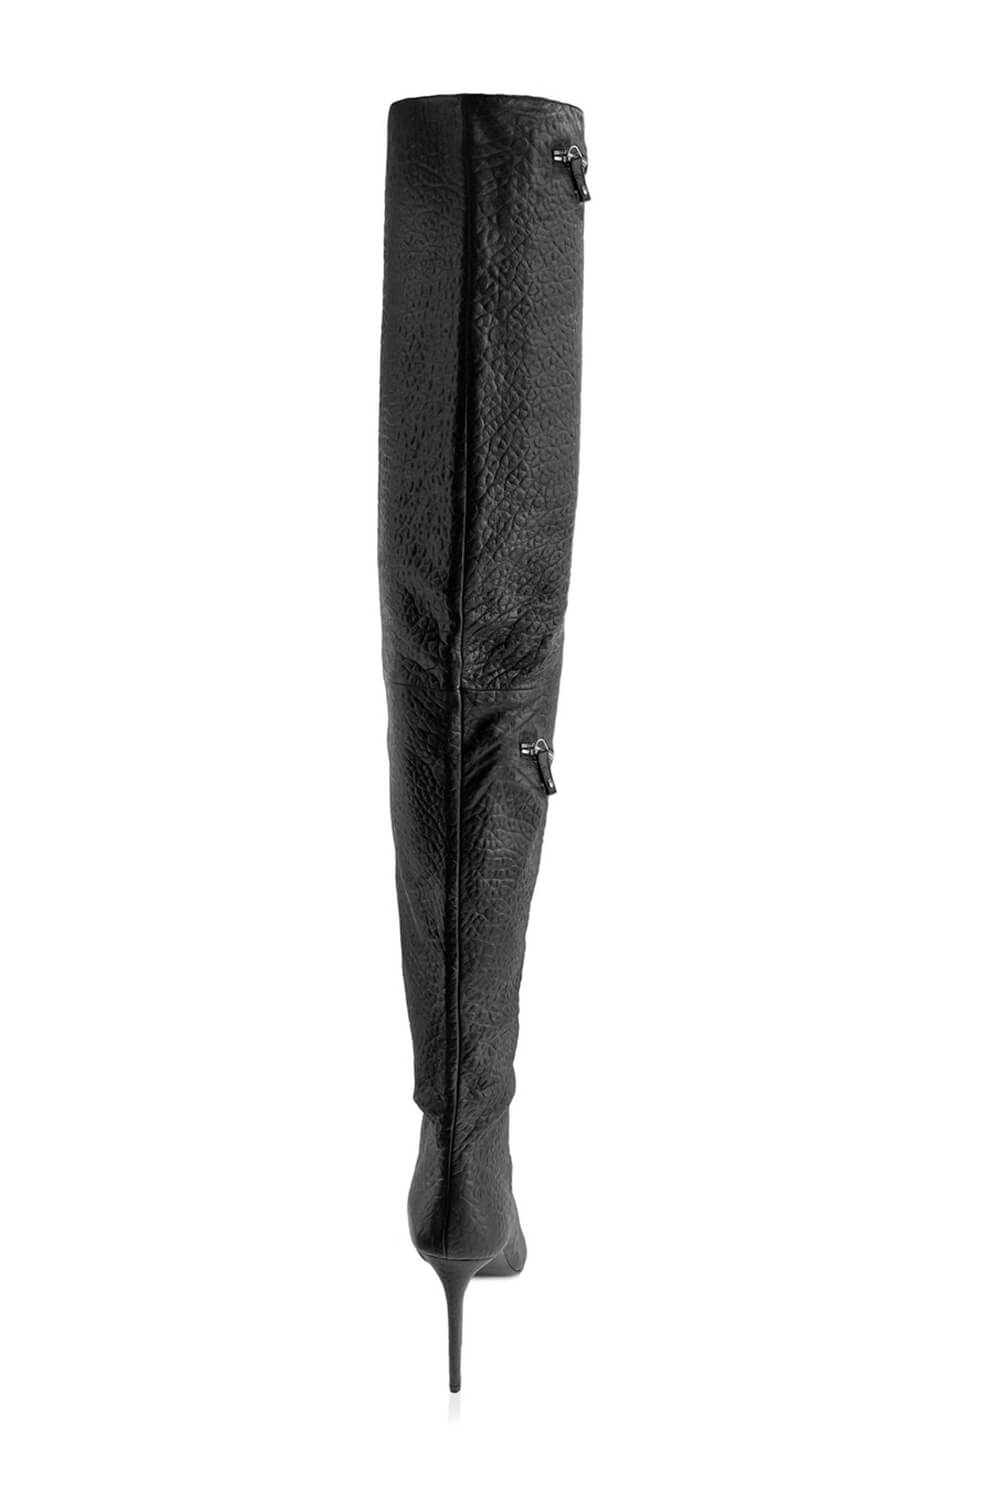 Bubble Textured Faux Leather Zip Detail Cargo Thigh High Stiletto Boots - Black